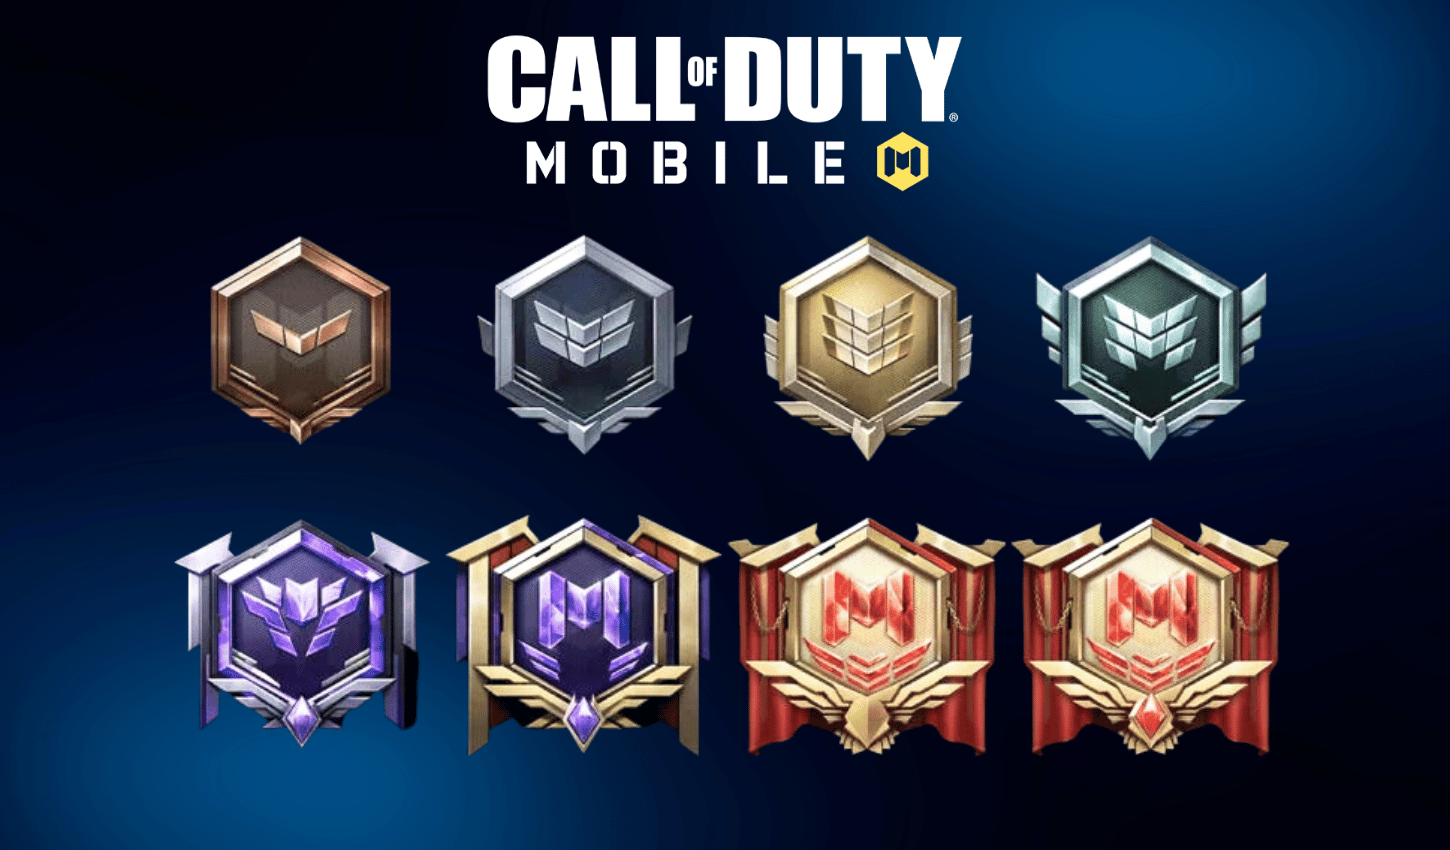 Ranked Play Guide: How to Play and Rank Up Rewards